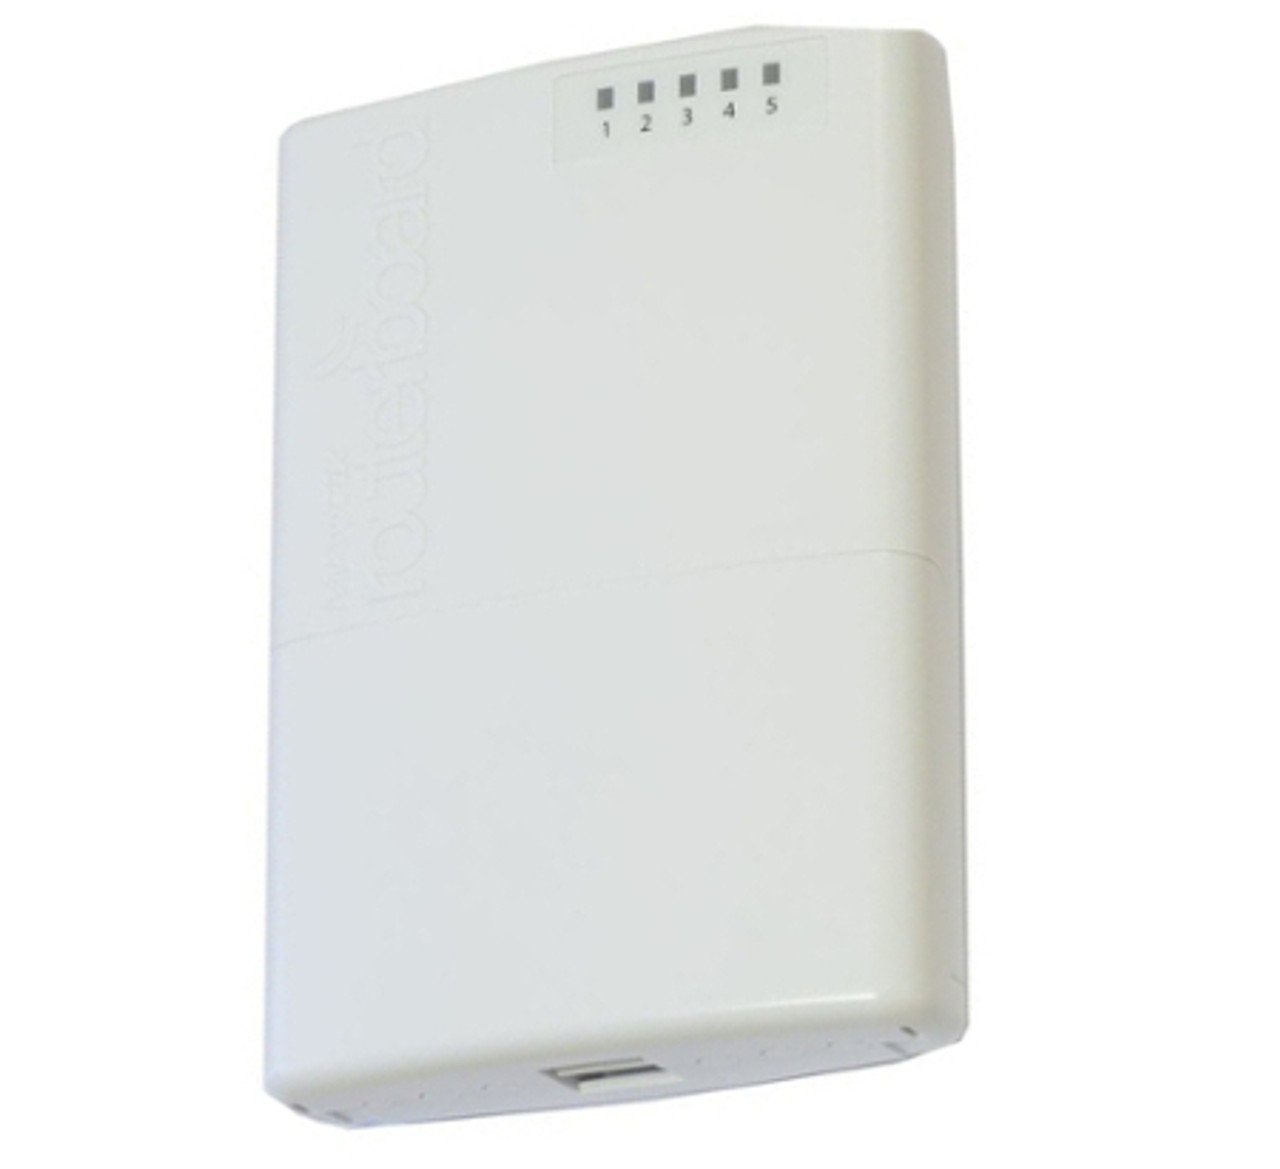 MikroTik RB750P-PBr2 PowerBox outdoor five Ethernet port router with ...